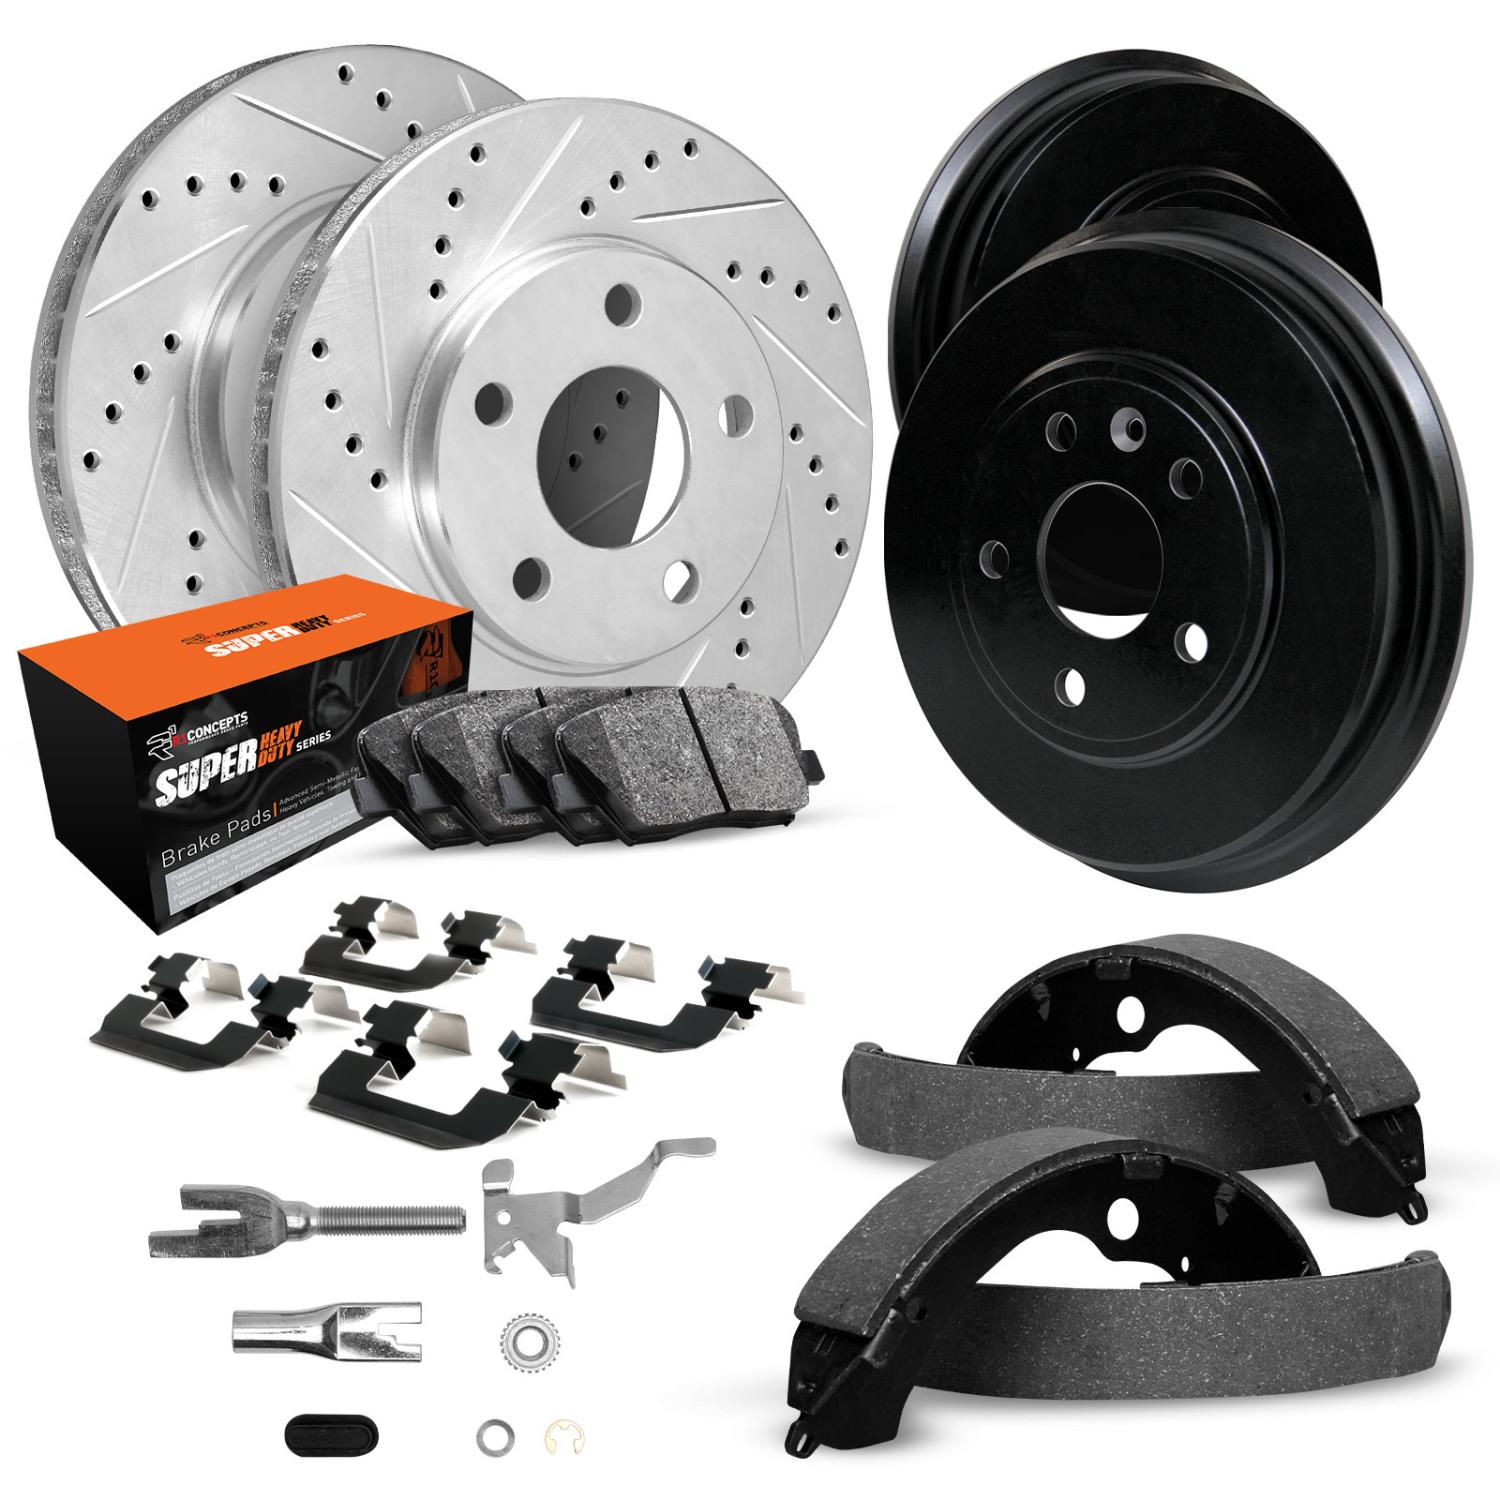 E-Line Drilled/Slotted Silver Rotor & Drum Set w/Super-Duty Pads, Shoes/Hardware/Adjusters, 1986-1988 Ford/Lincoln/Mercury/Mazda